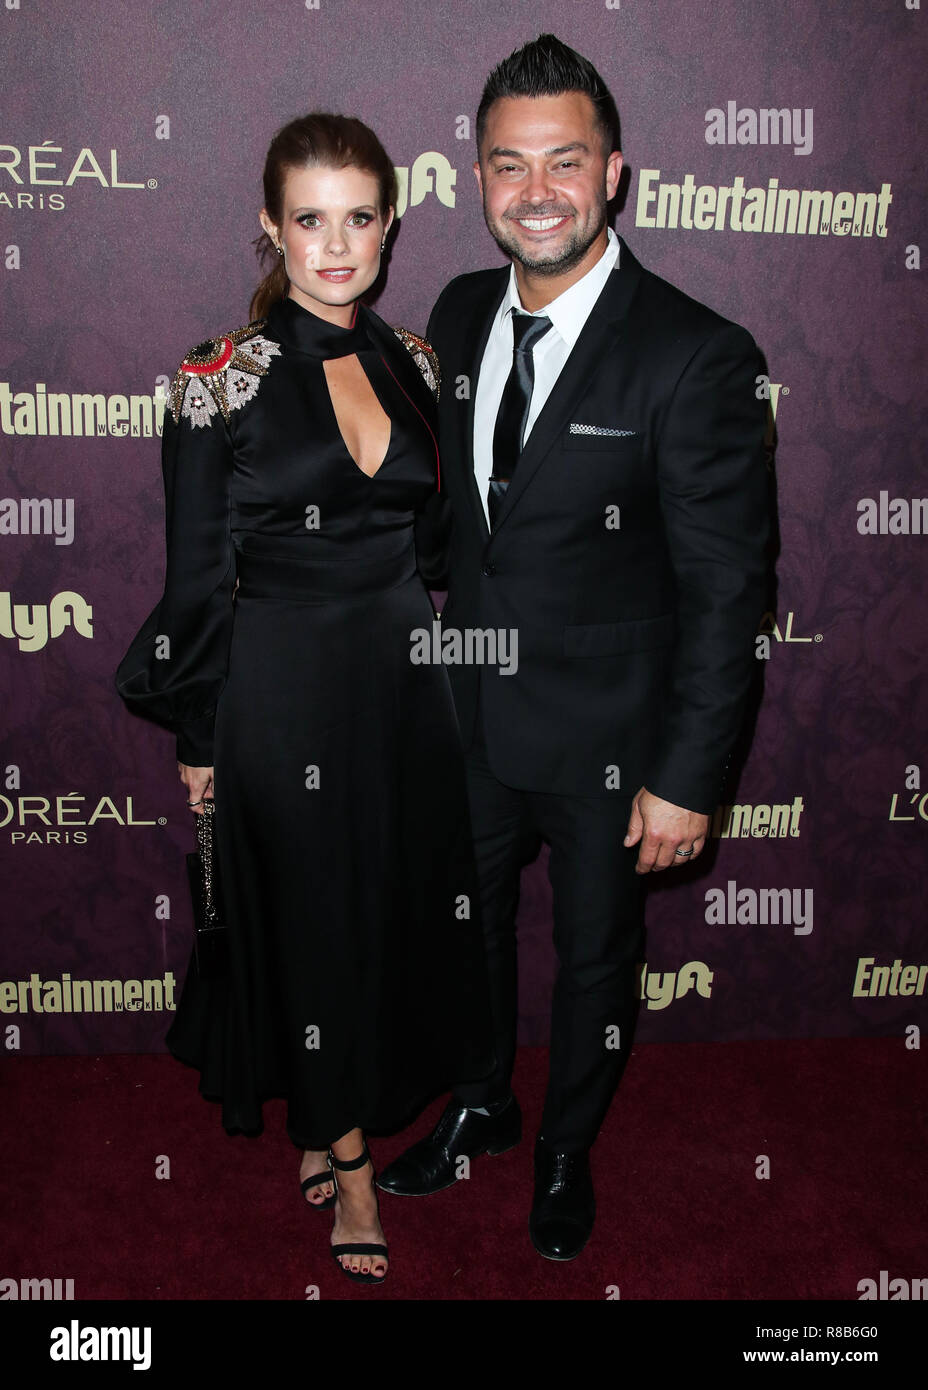 WEST HOLLYWOOD, LOS ANGELES, CA, USA - SEPTEMBER 15: JoAnna Garcia Swisher, Nick Swisher at the 2018 Entertainment Weekly Pre-Emmy Party held at the Sunset Tower Hotel on September 15, 2018 in West Hollywood, Los Angeles, California, United States. (Photo by Xavier Collin/Image Press Agency) Stock Photo